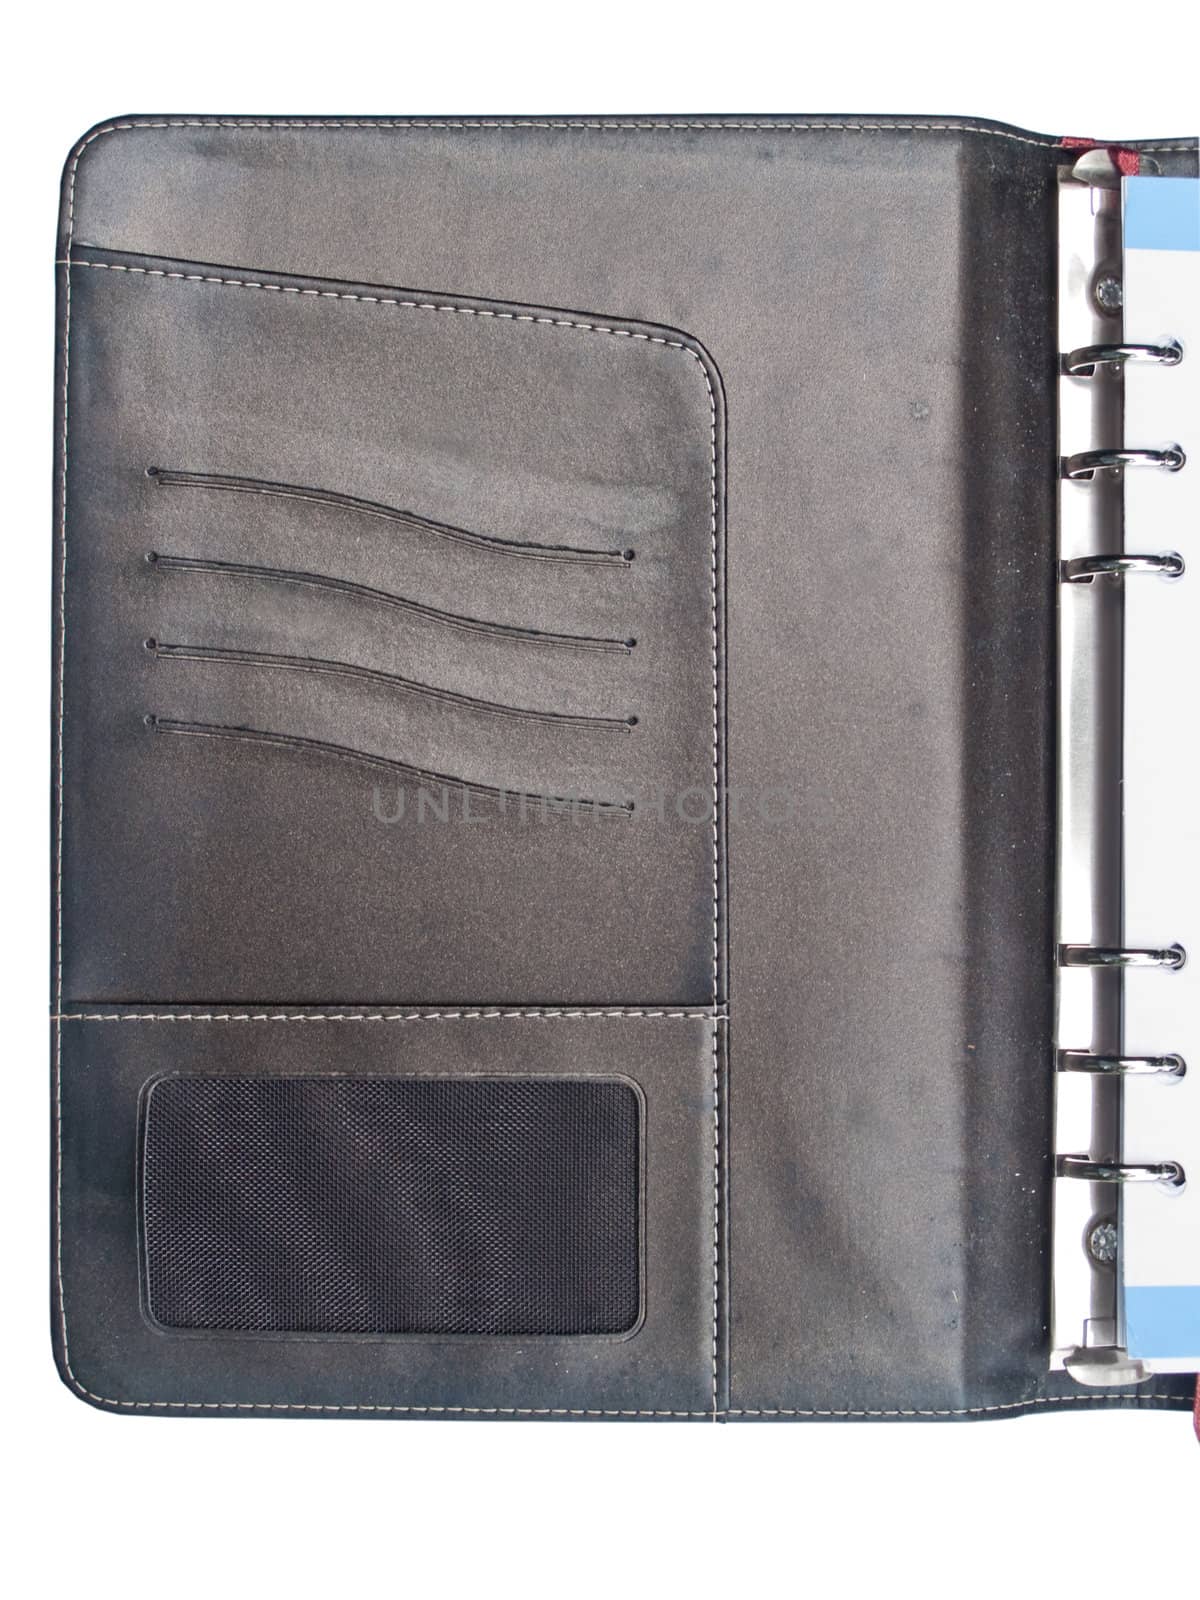 Inside cover of leather organizer with name card holder